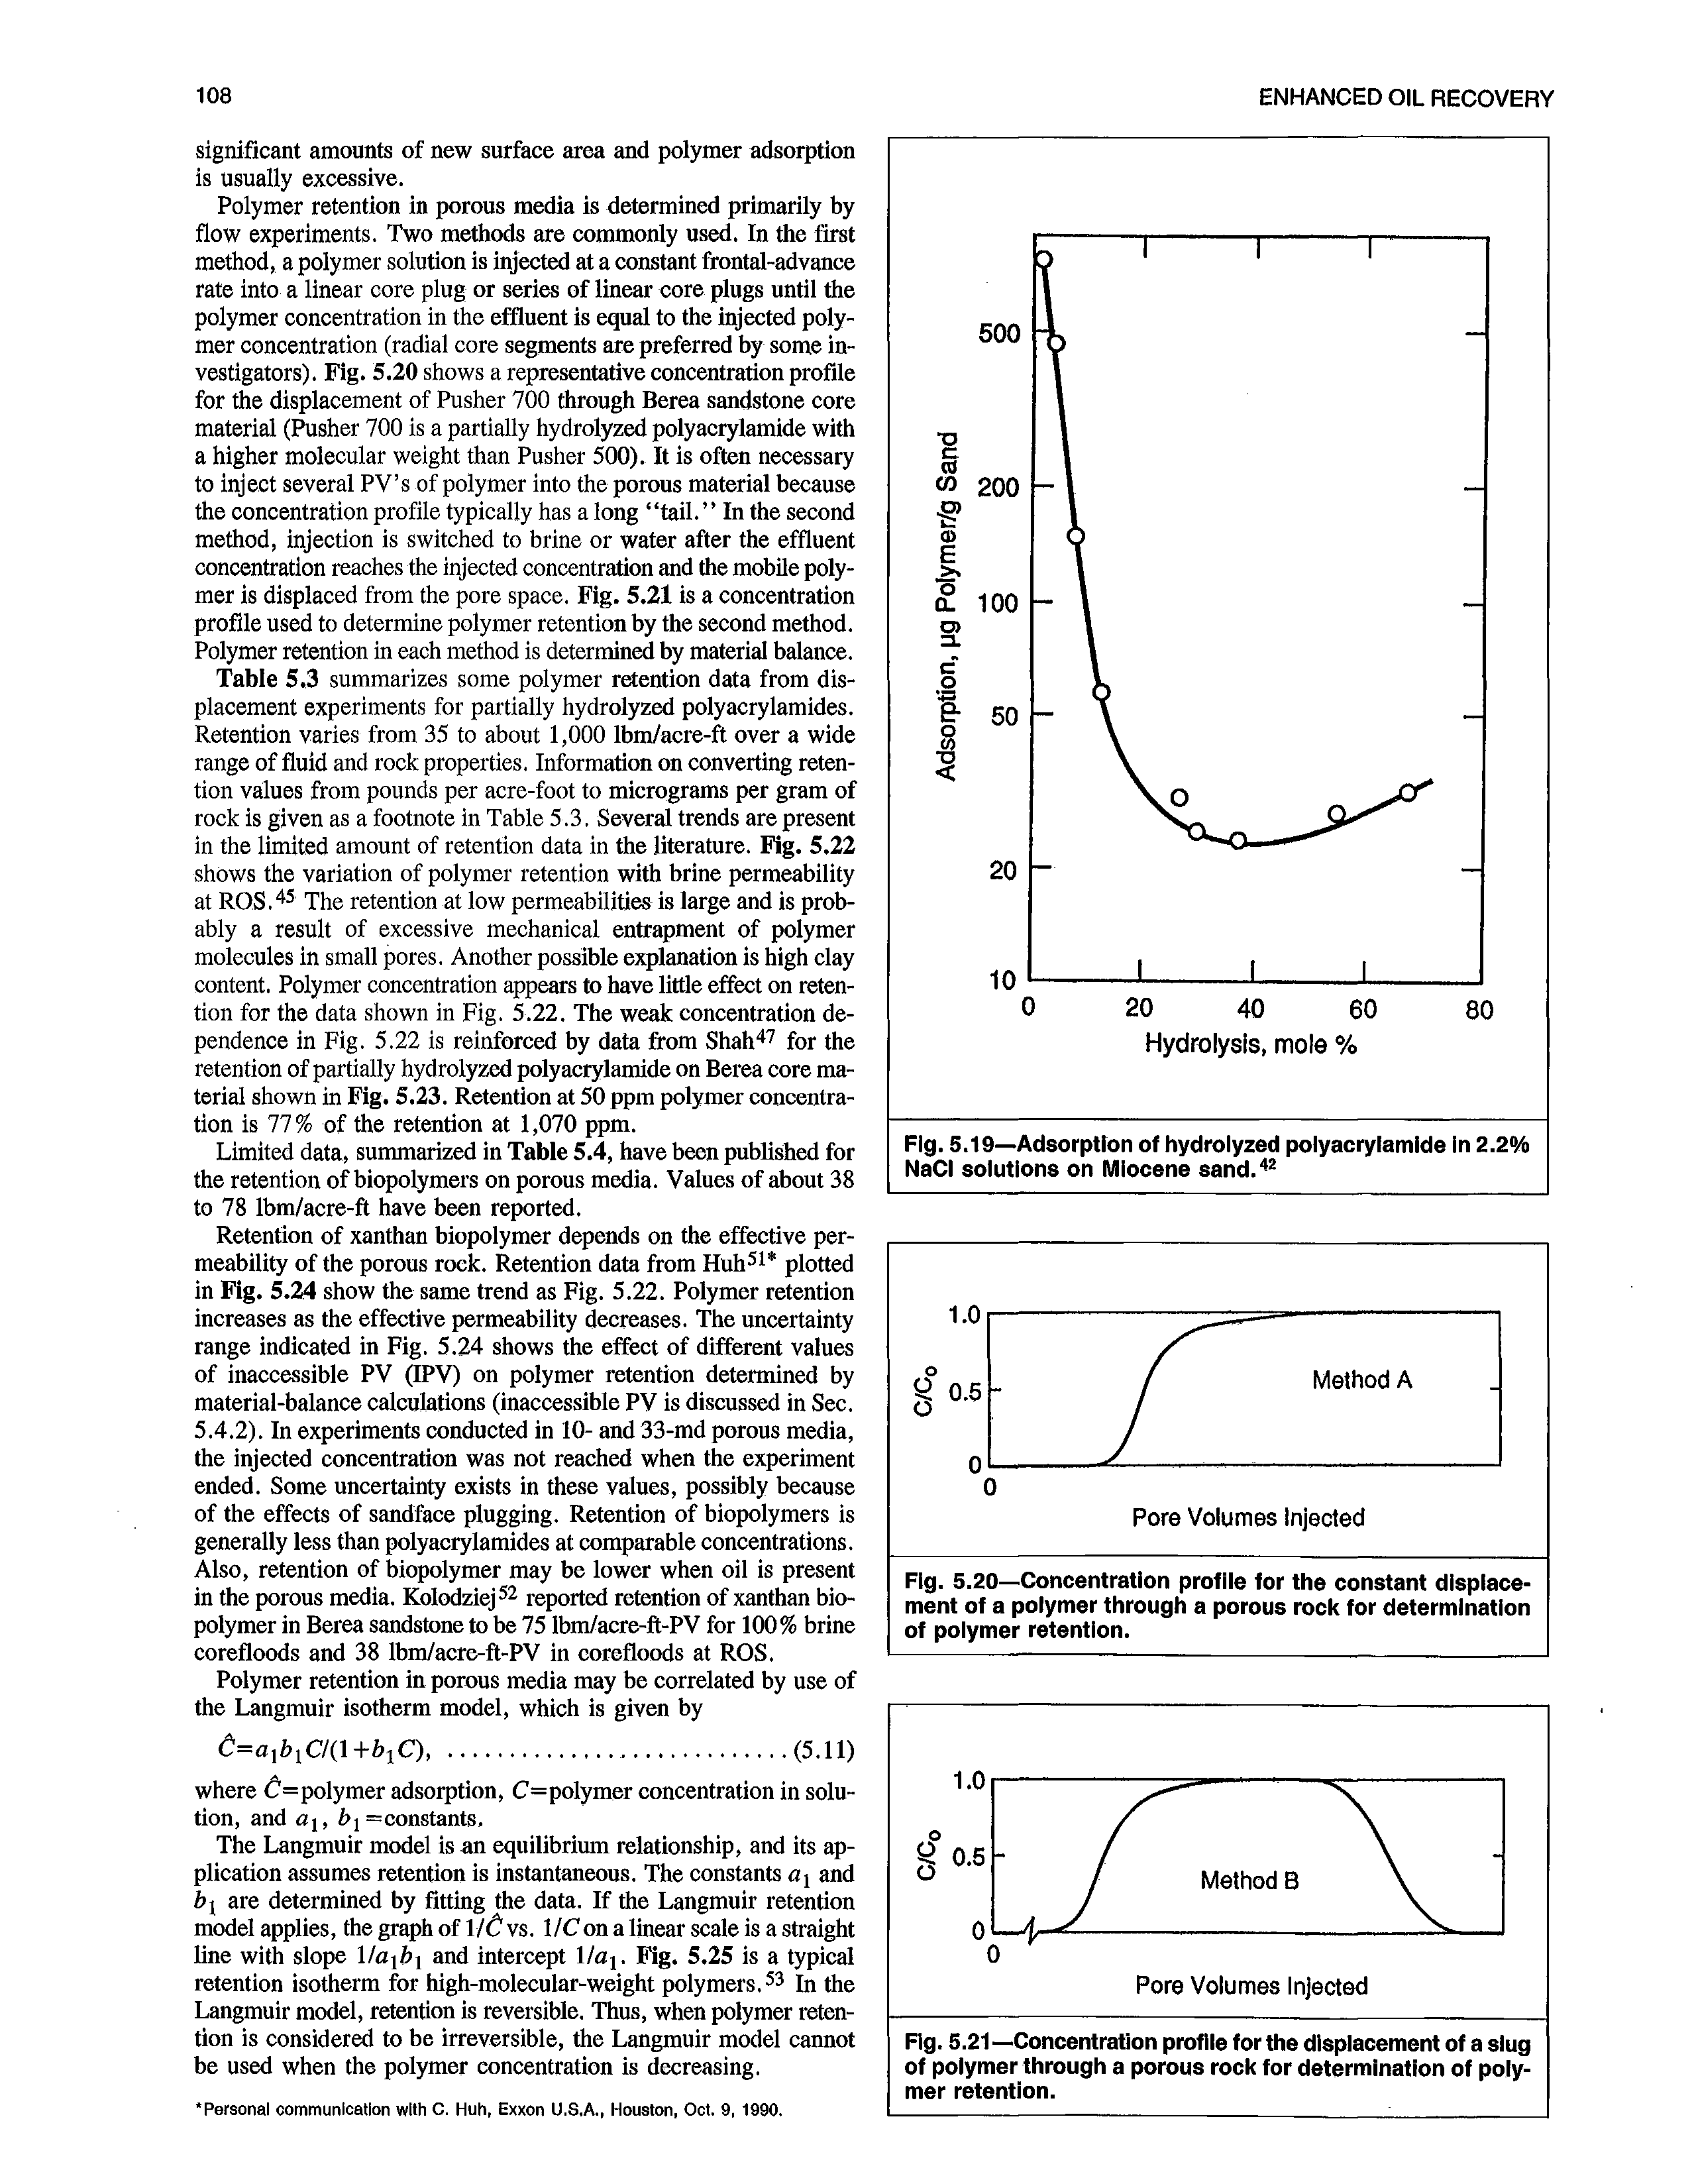 Table 5.3 summarizes some polymer retention data from displacement experiments for partially hydrolyzed polyacrylamides. Retention varies from 35 to about 1,000 Ibm/acre-ft over a wide range of fluid and rock properties. Information on converting retention values from pounds per acre-foot to micrograms per gram of rock is given as a footnote in Table 5.3. Several trends are present in the limited amount of retention data in the literature. Fig. 5.22 shows the variation of polymer retention with brine permeability at ROS. The retention at low permeabilities is large and is probably a result of excessive mechanical entrapment of polymer molecules in small pores. Another possible explanation is high clay content. Polymer concentration appears to have little effect on retention for the data shown in Fig. 5.22. The weak concentration dependence in Fig. 5.22 is reinforced by data from Shah for the retention of partially hydrolyzed polyacrylamide on Berea core material shown in Fig. 5.23. Retention at 50 ppm polymer concentration is 77% of the retention at 1,070 ppm.